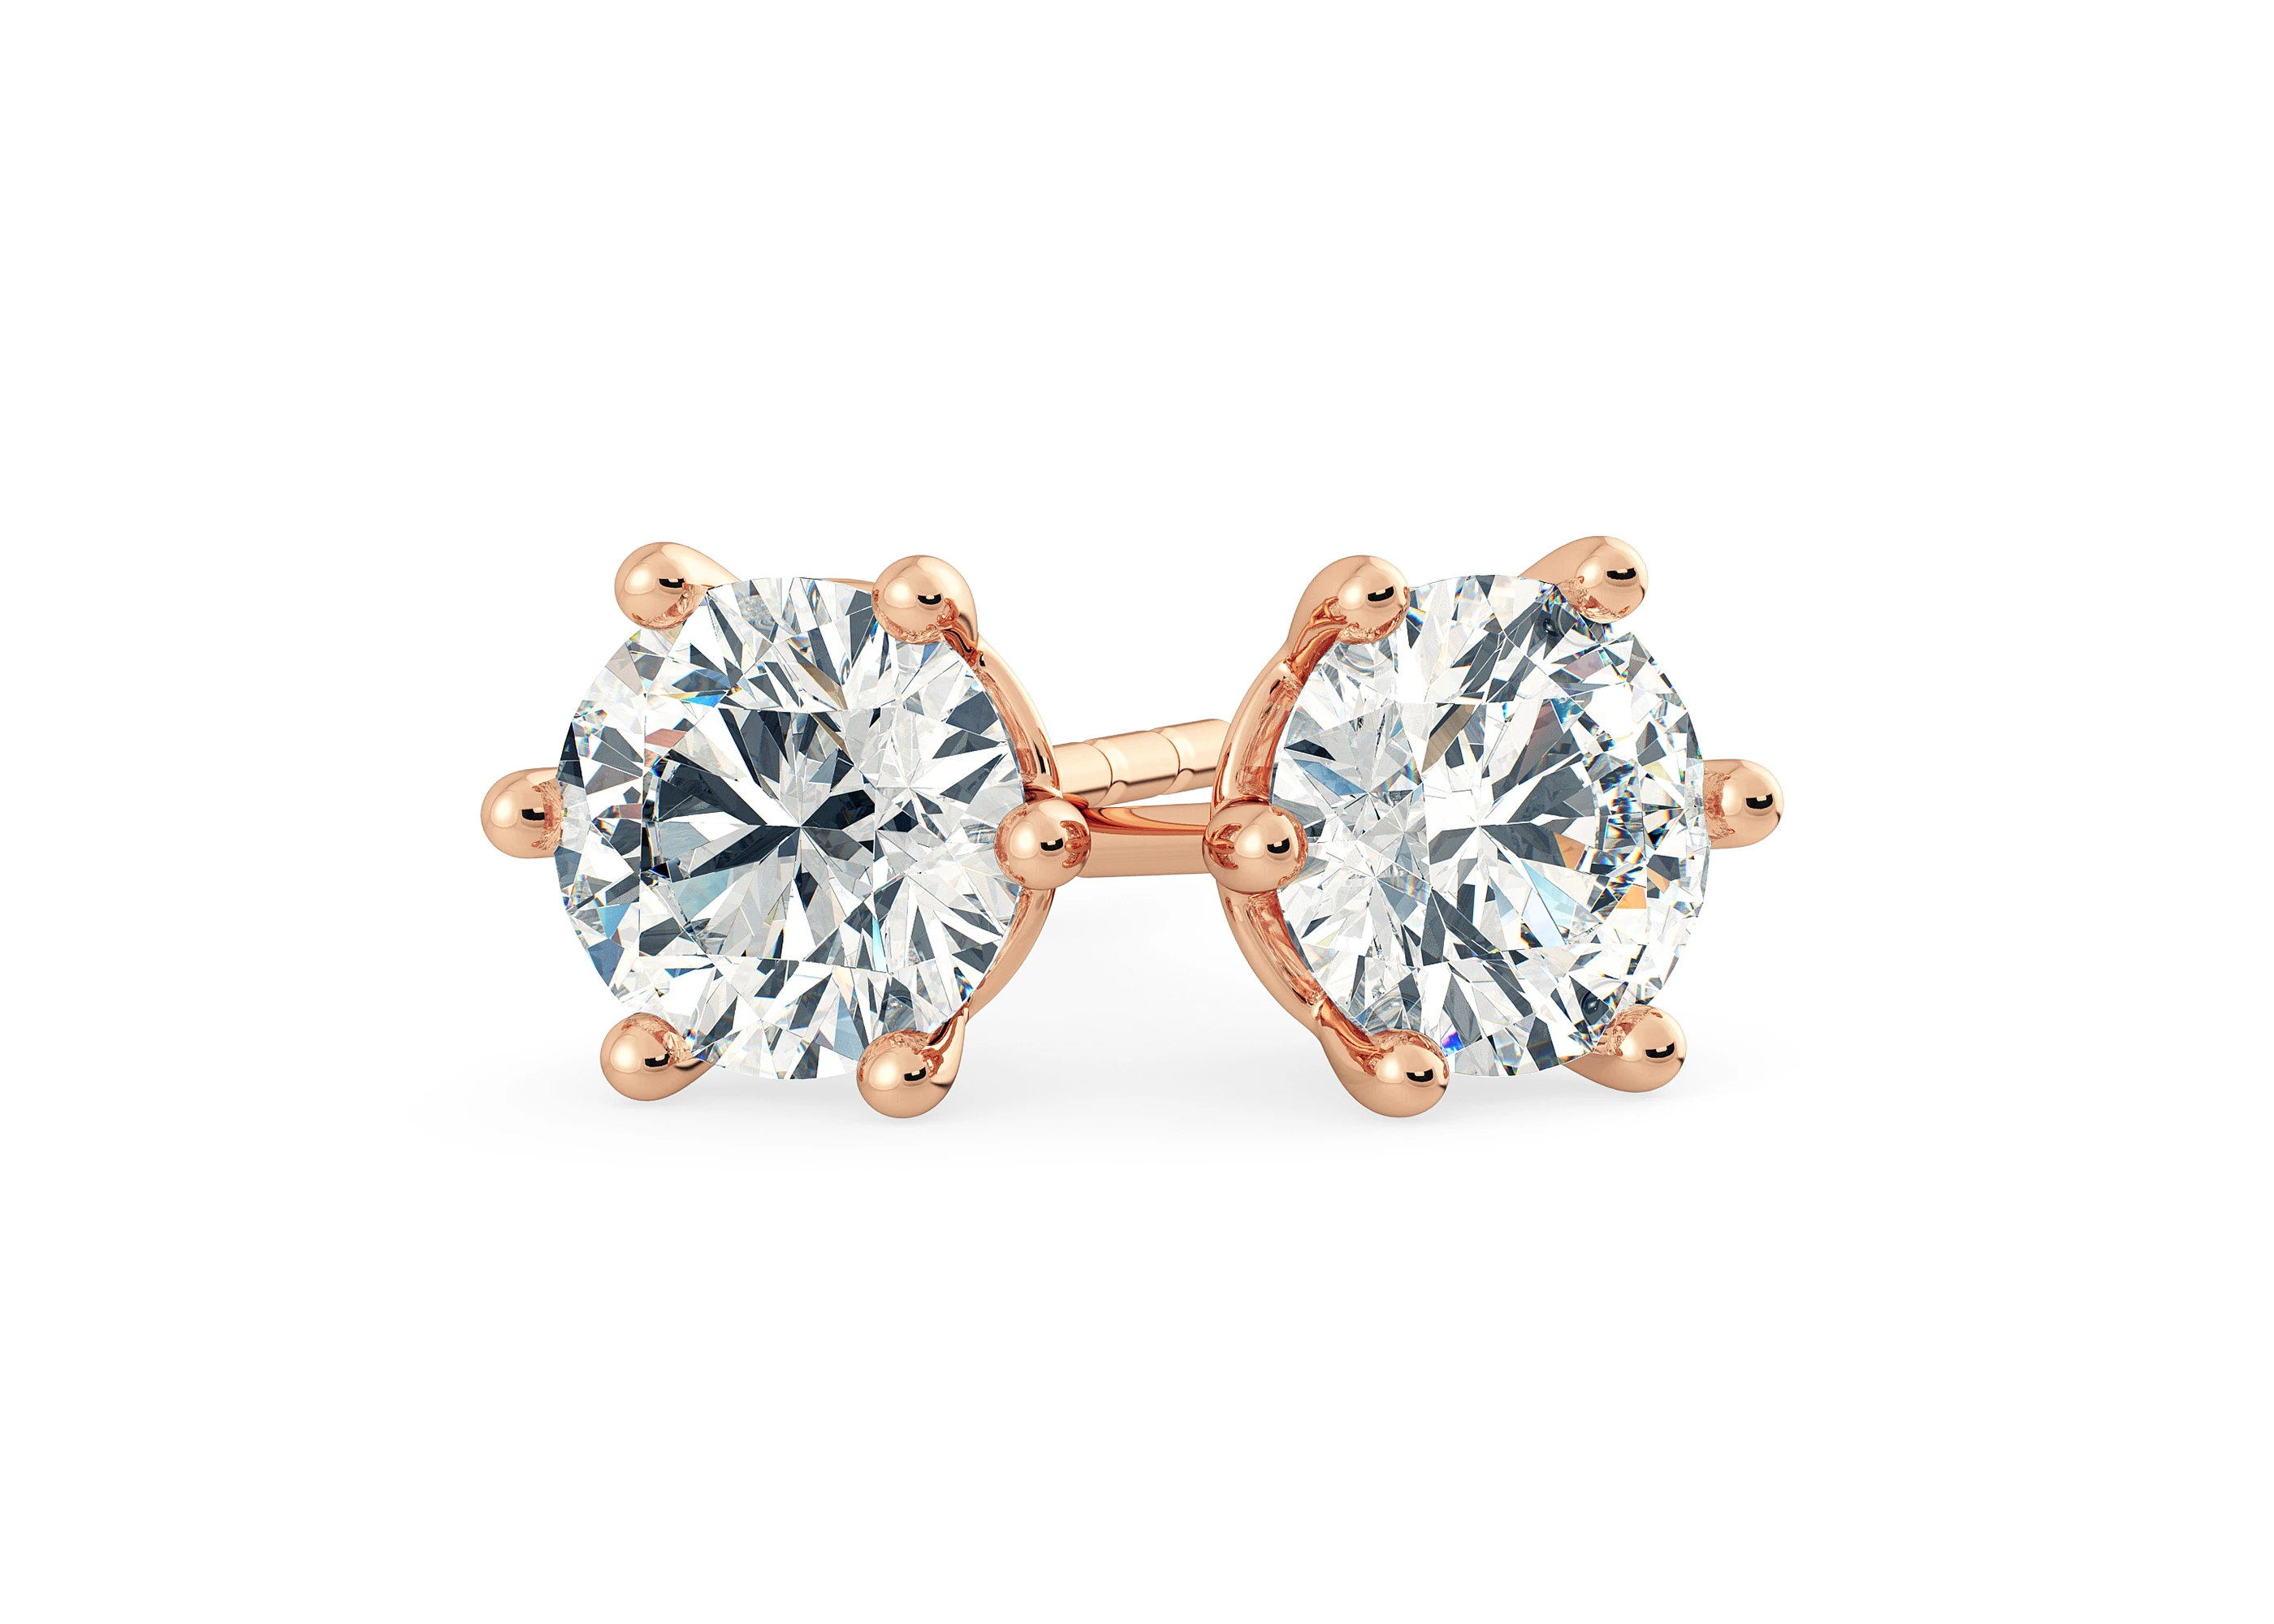 Bellezza Round Brilliant Diamond Stud Earrings in 18K Rose Gold with Butterfly Backs